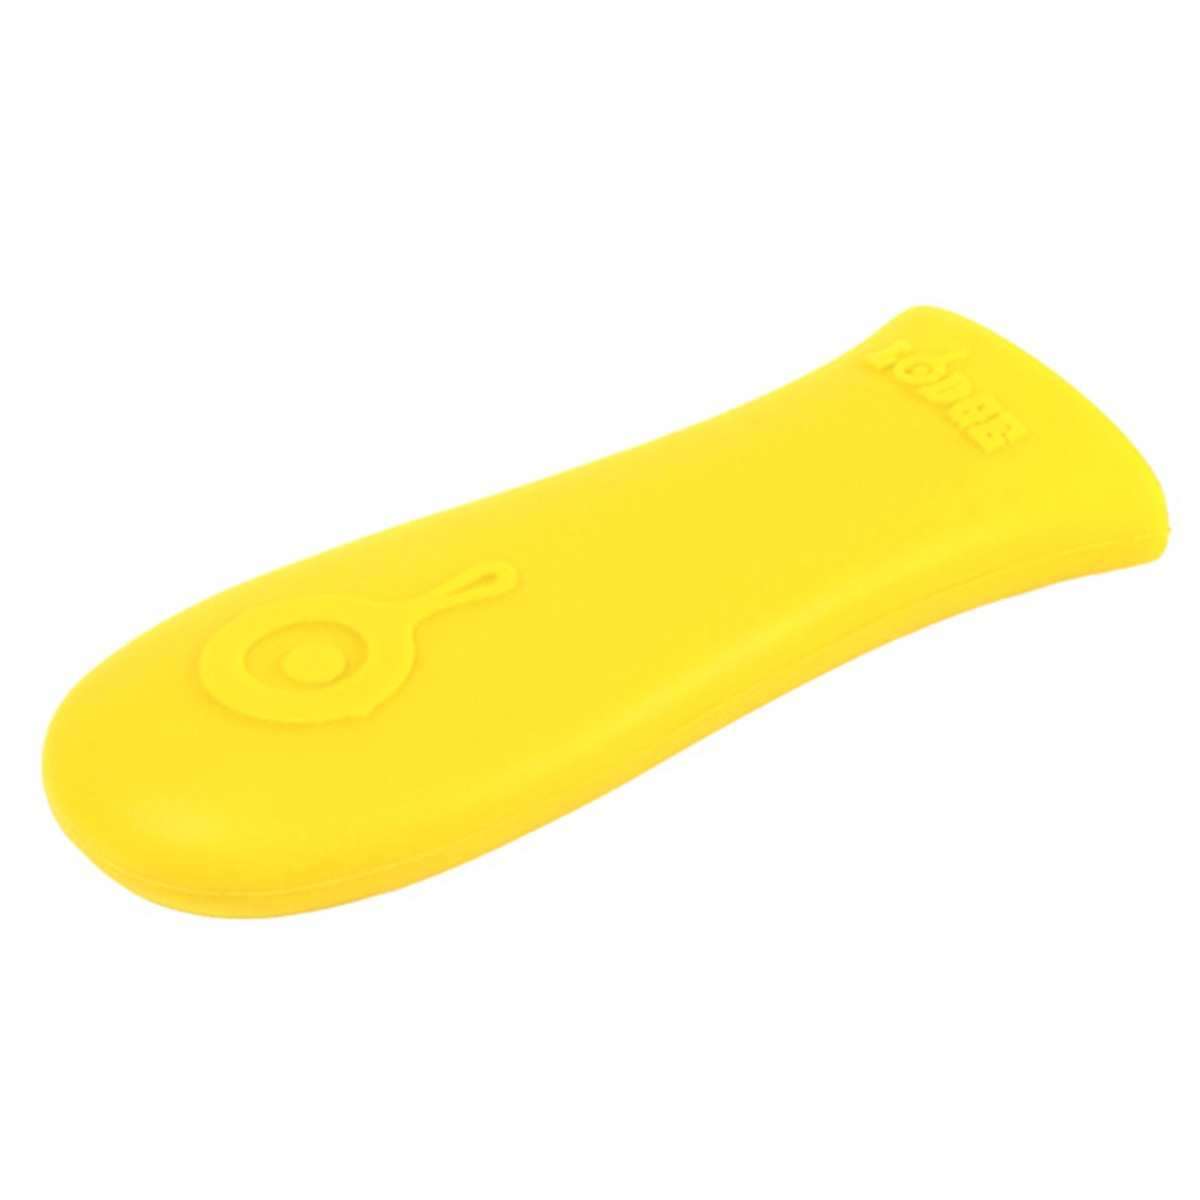 Yellow Silicone Handle Holder, for cast iron pans - Lodge®